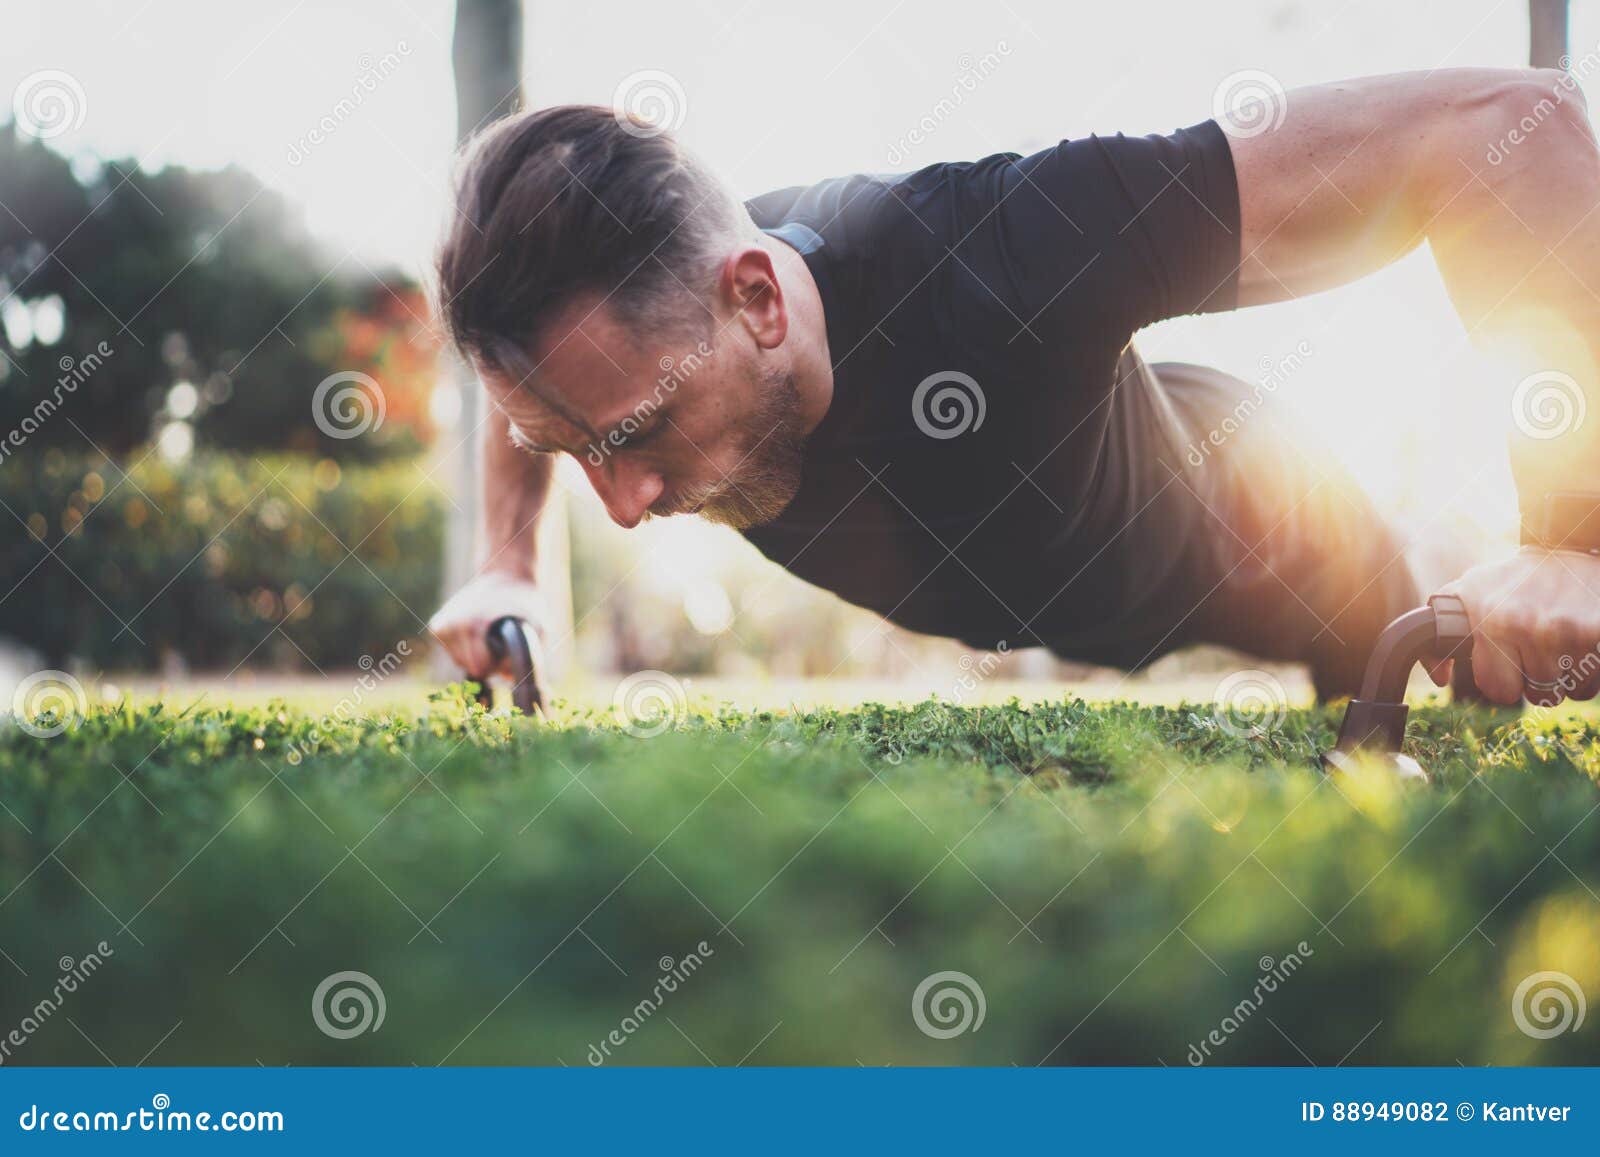 muscular athlete exercising push up outside in sunny park. fit shirtless male fitness model in crossfit exercise